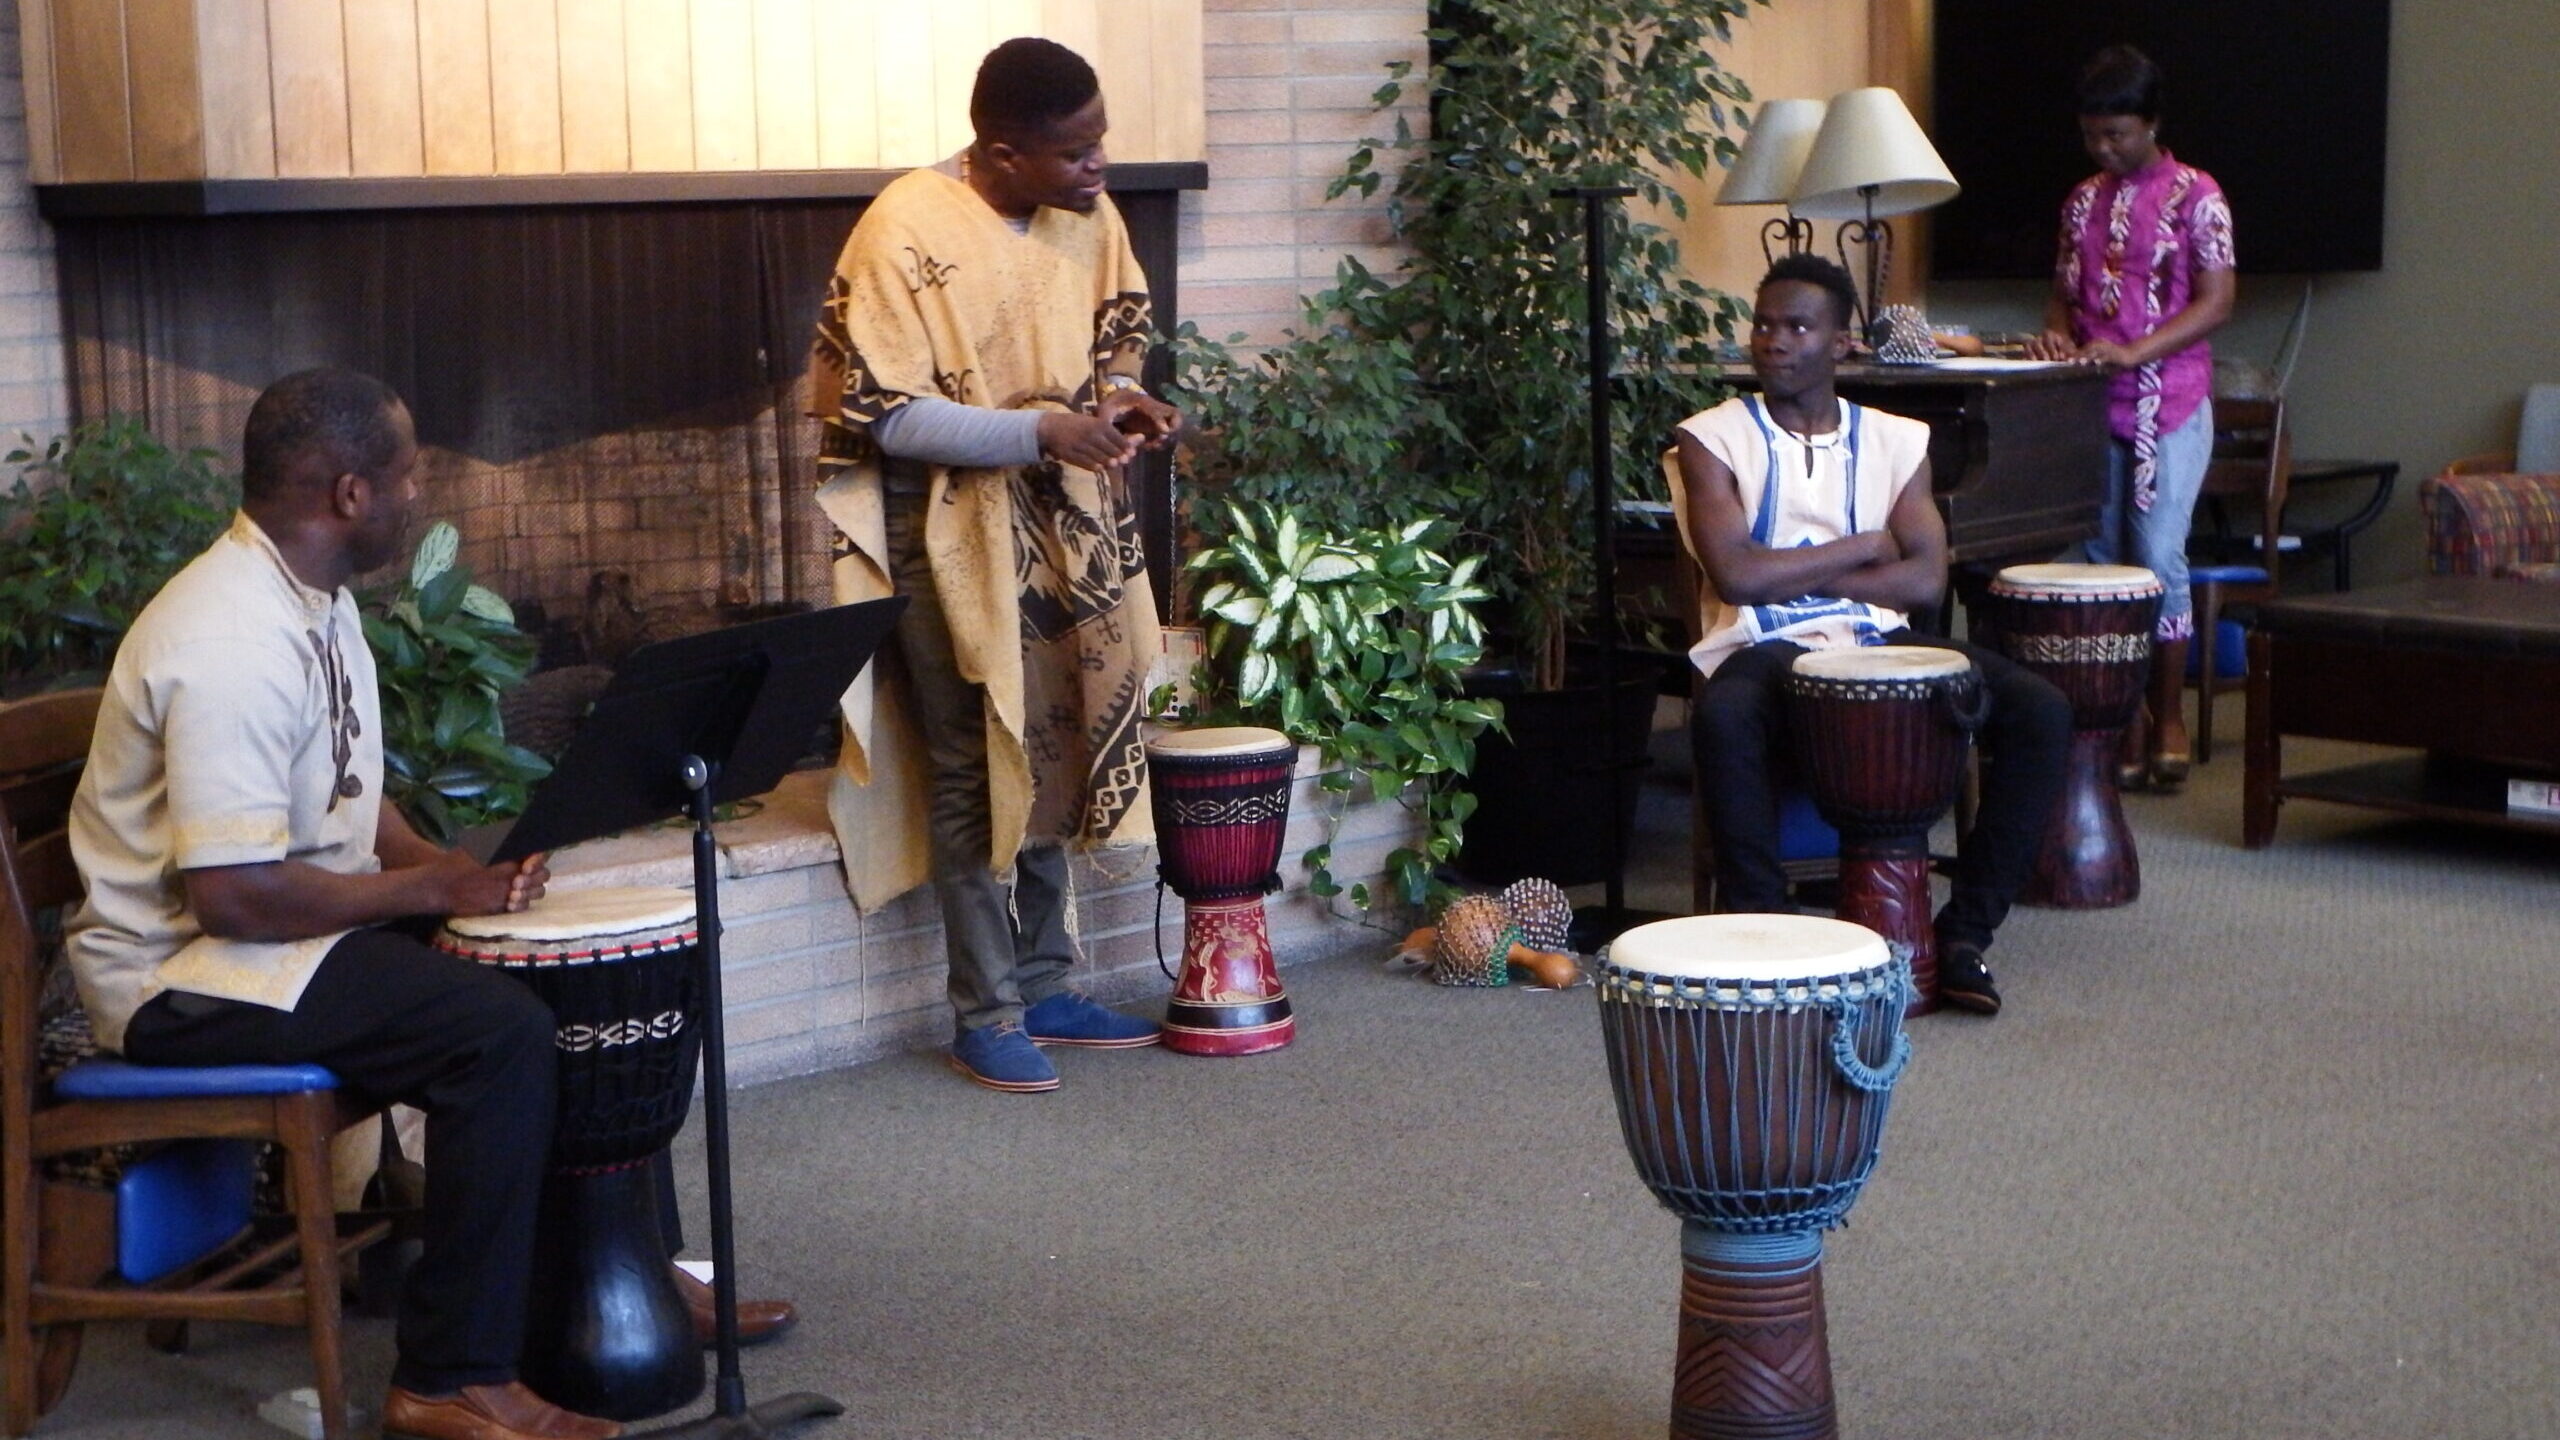 Three people performing with Djembe drums in front of a fire place.